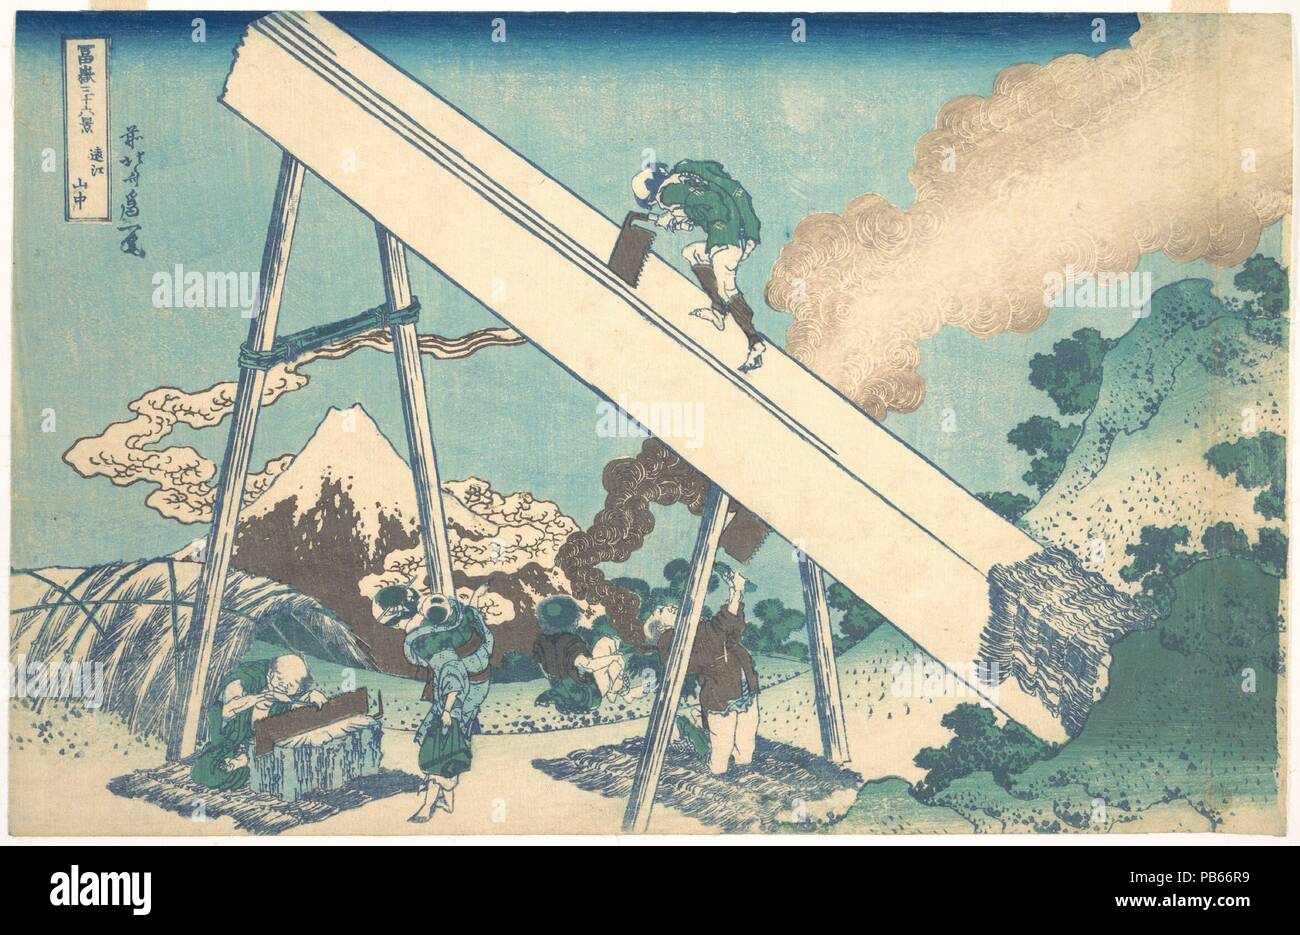 In the Mountains of Totomi Province (Totomi sanchu), from the series Thirty-six Views of Mount Fuji (Fugaku sanjurokkei). Artist: Katsushika Hokusai (Japanese, Tokyo (Edo) 1760-1849 Tokyo (Edo)). Culture: Japan. Dimensions: 9 3/5 x 14 29/32 in. (24.4 x 37.9 cm). Date: ca. 1830-32.  A massive inclined piece of lumber dominates the pictorial space of the print, and a small image of Mount Fuji is encapsulated in the frame of the raised support. Completely absorbed in cutting the trunk into planks, the lumbermen are unaffected by the magnificent vista beyond. Artwork also known as: 36 ANSICHTEN DE Stock Photo